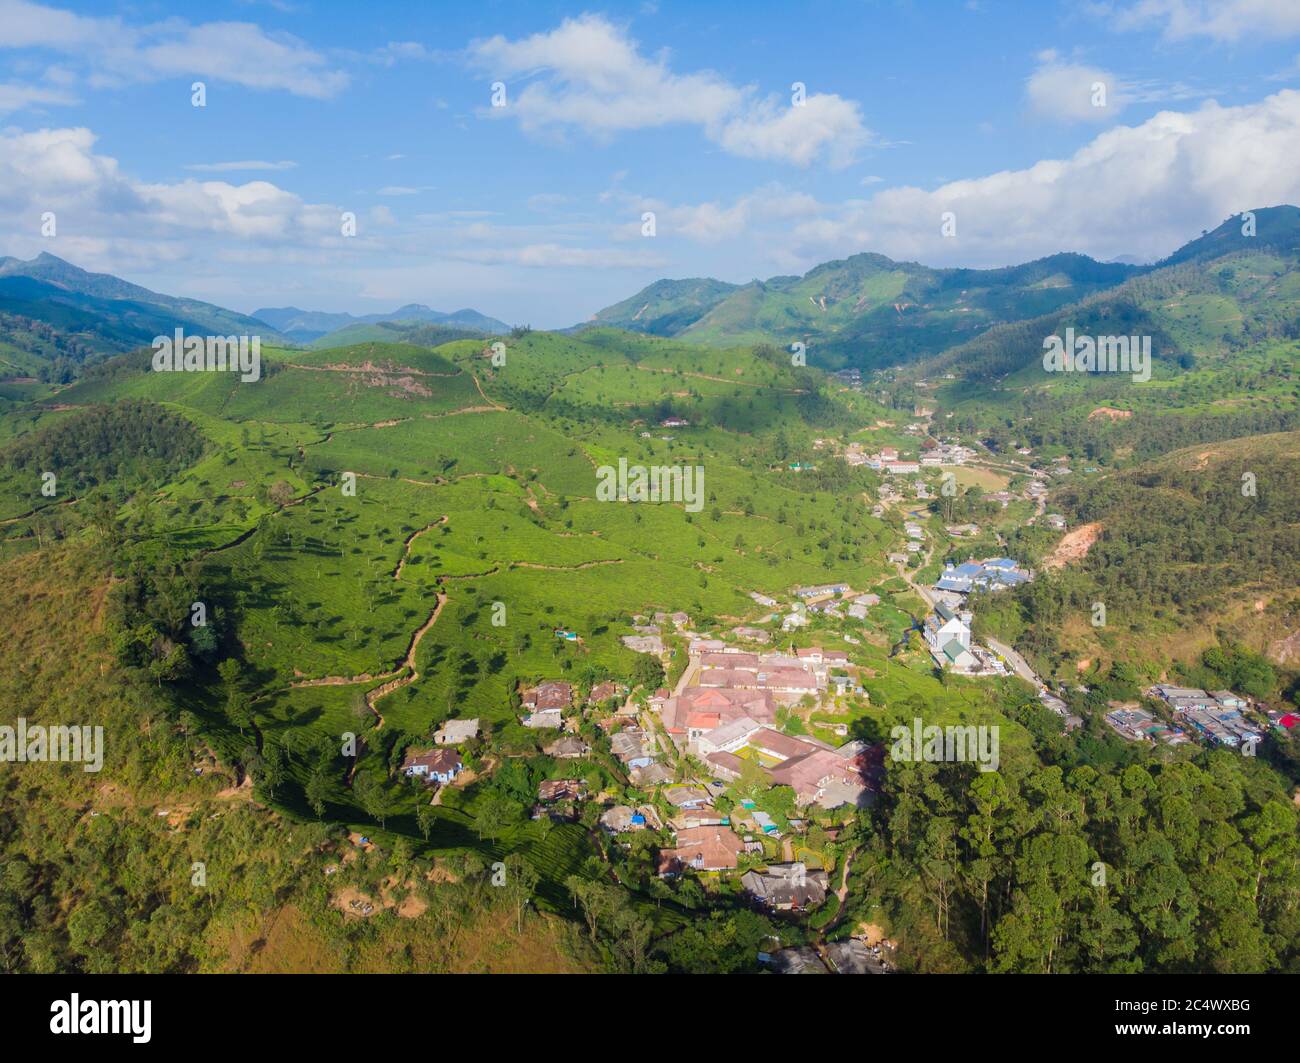 Aerial view of the neighborhood of the city of Munnar. Stock Photo